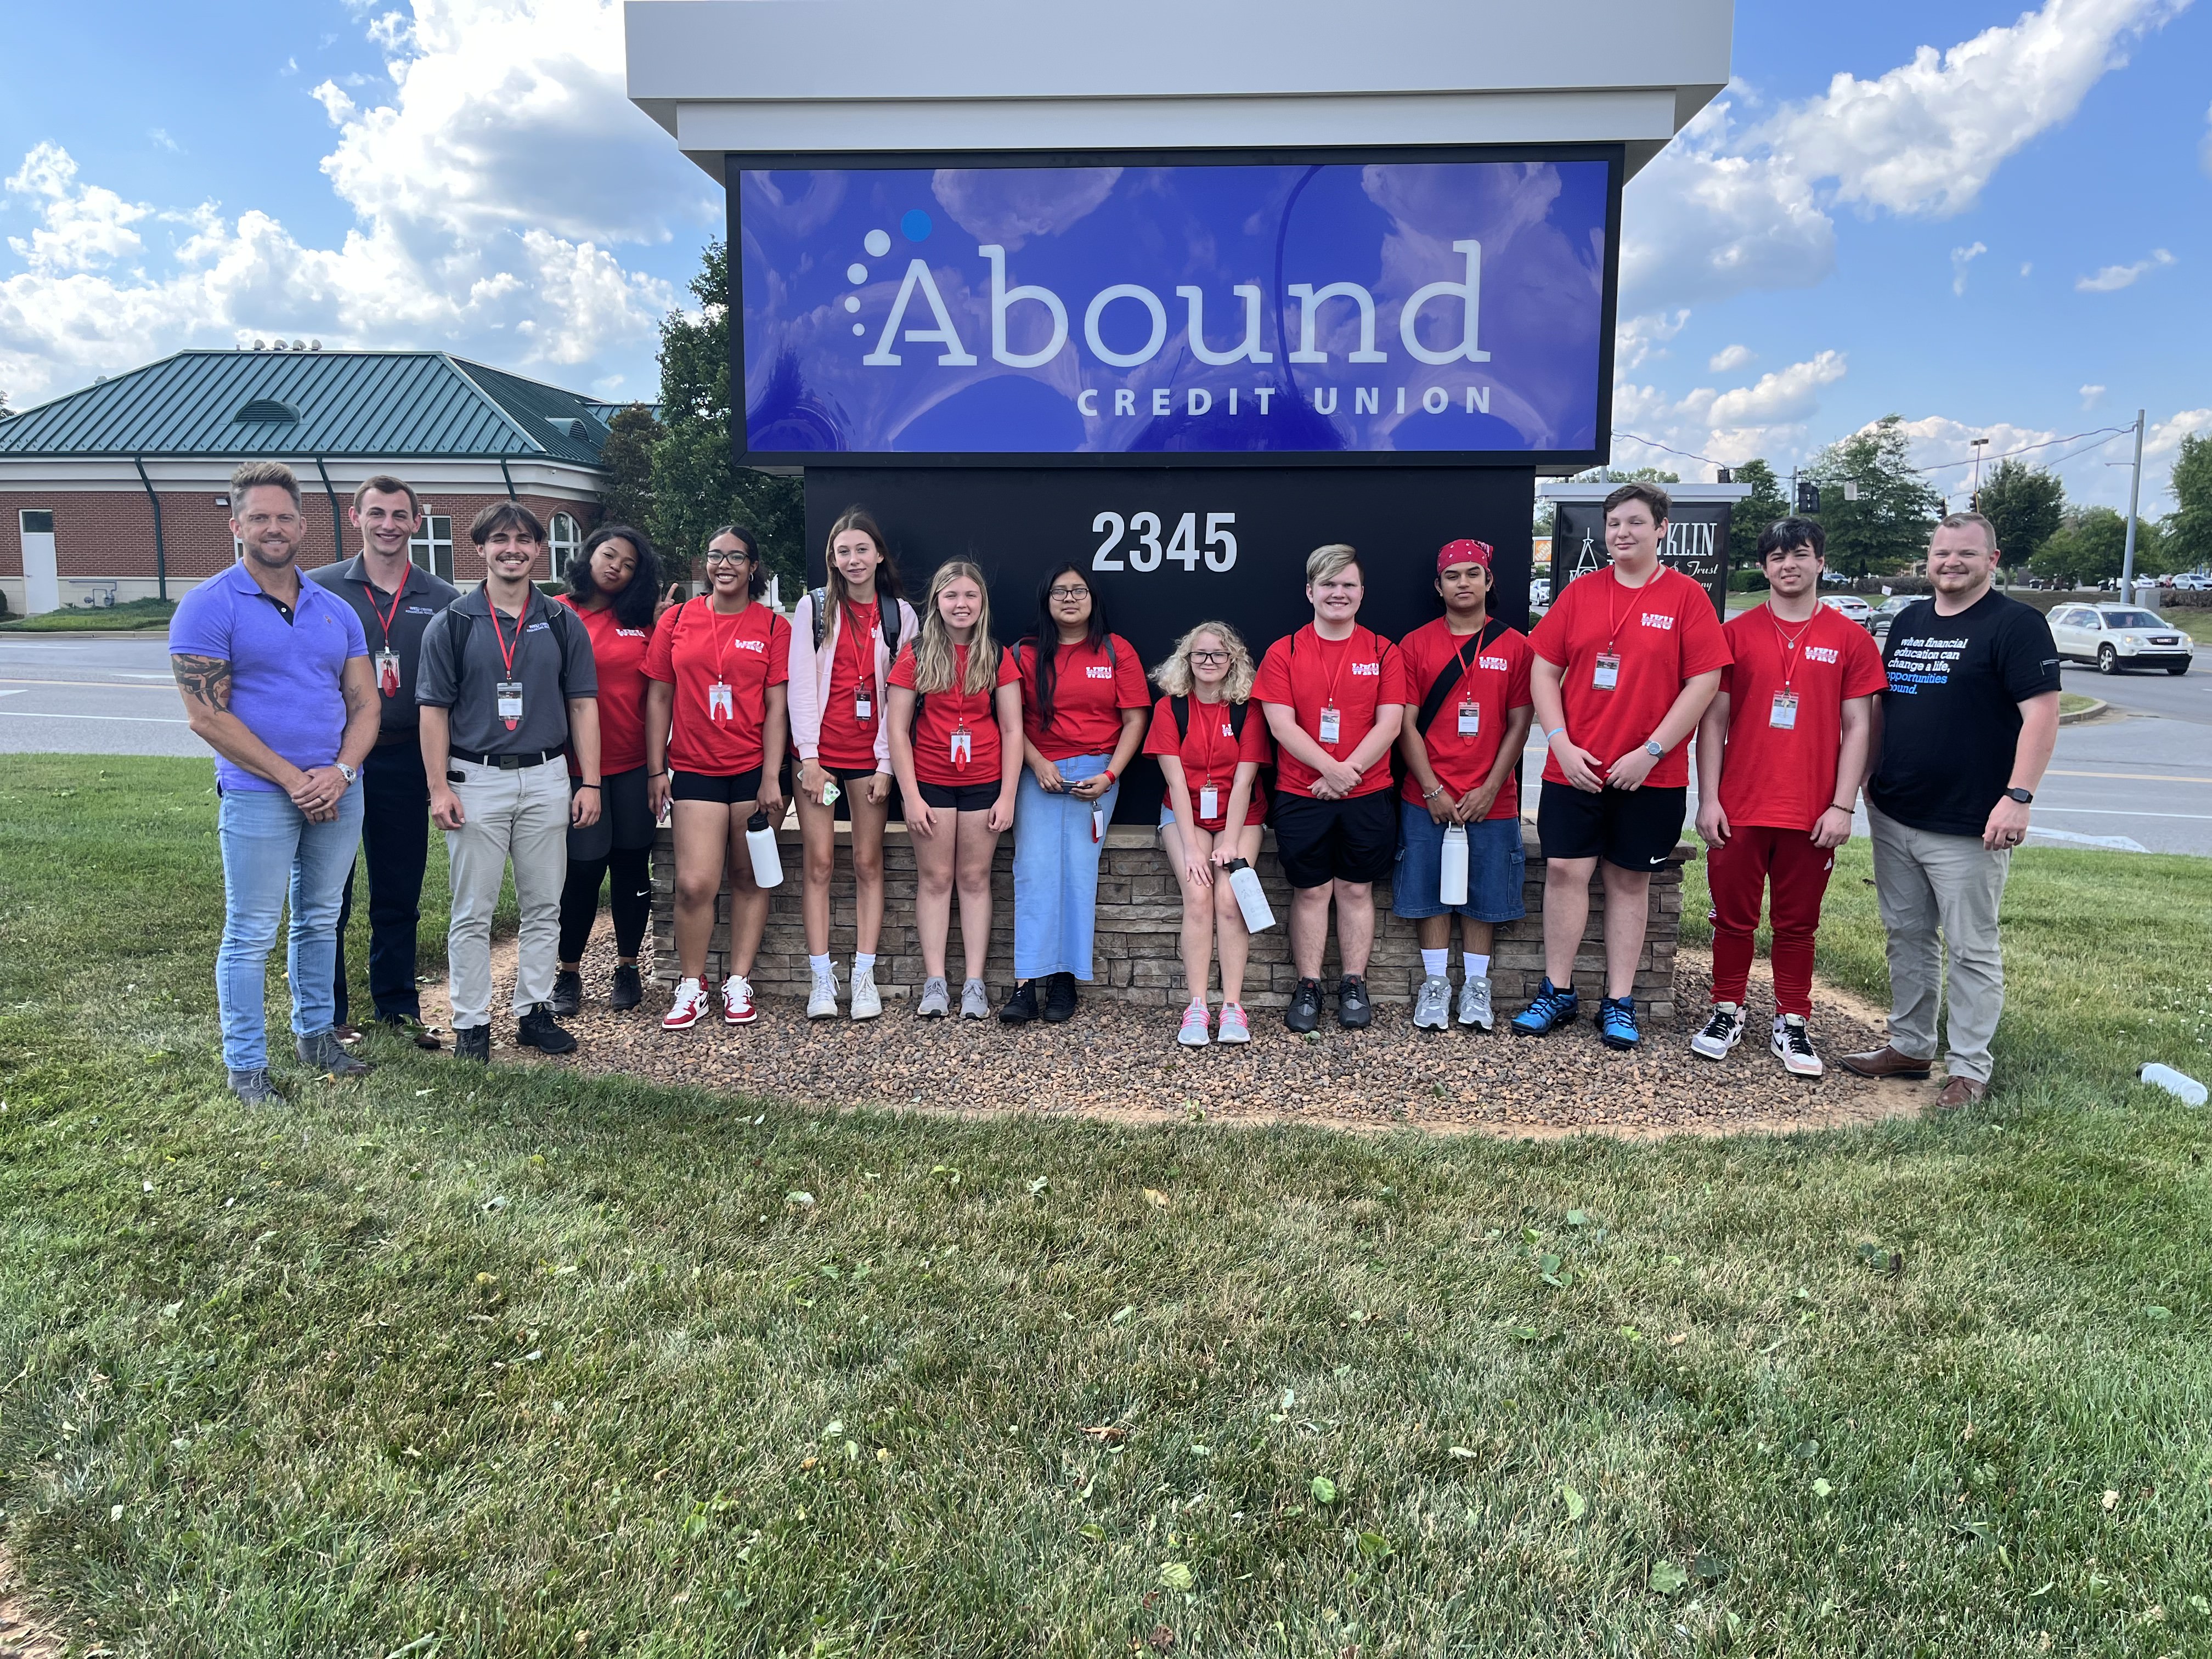 Students pose for a photo at Abound Credit Union, the camp sponsor.